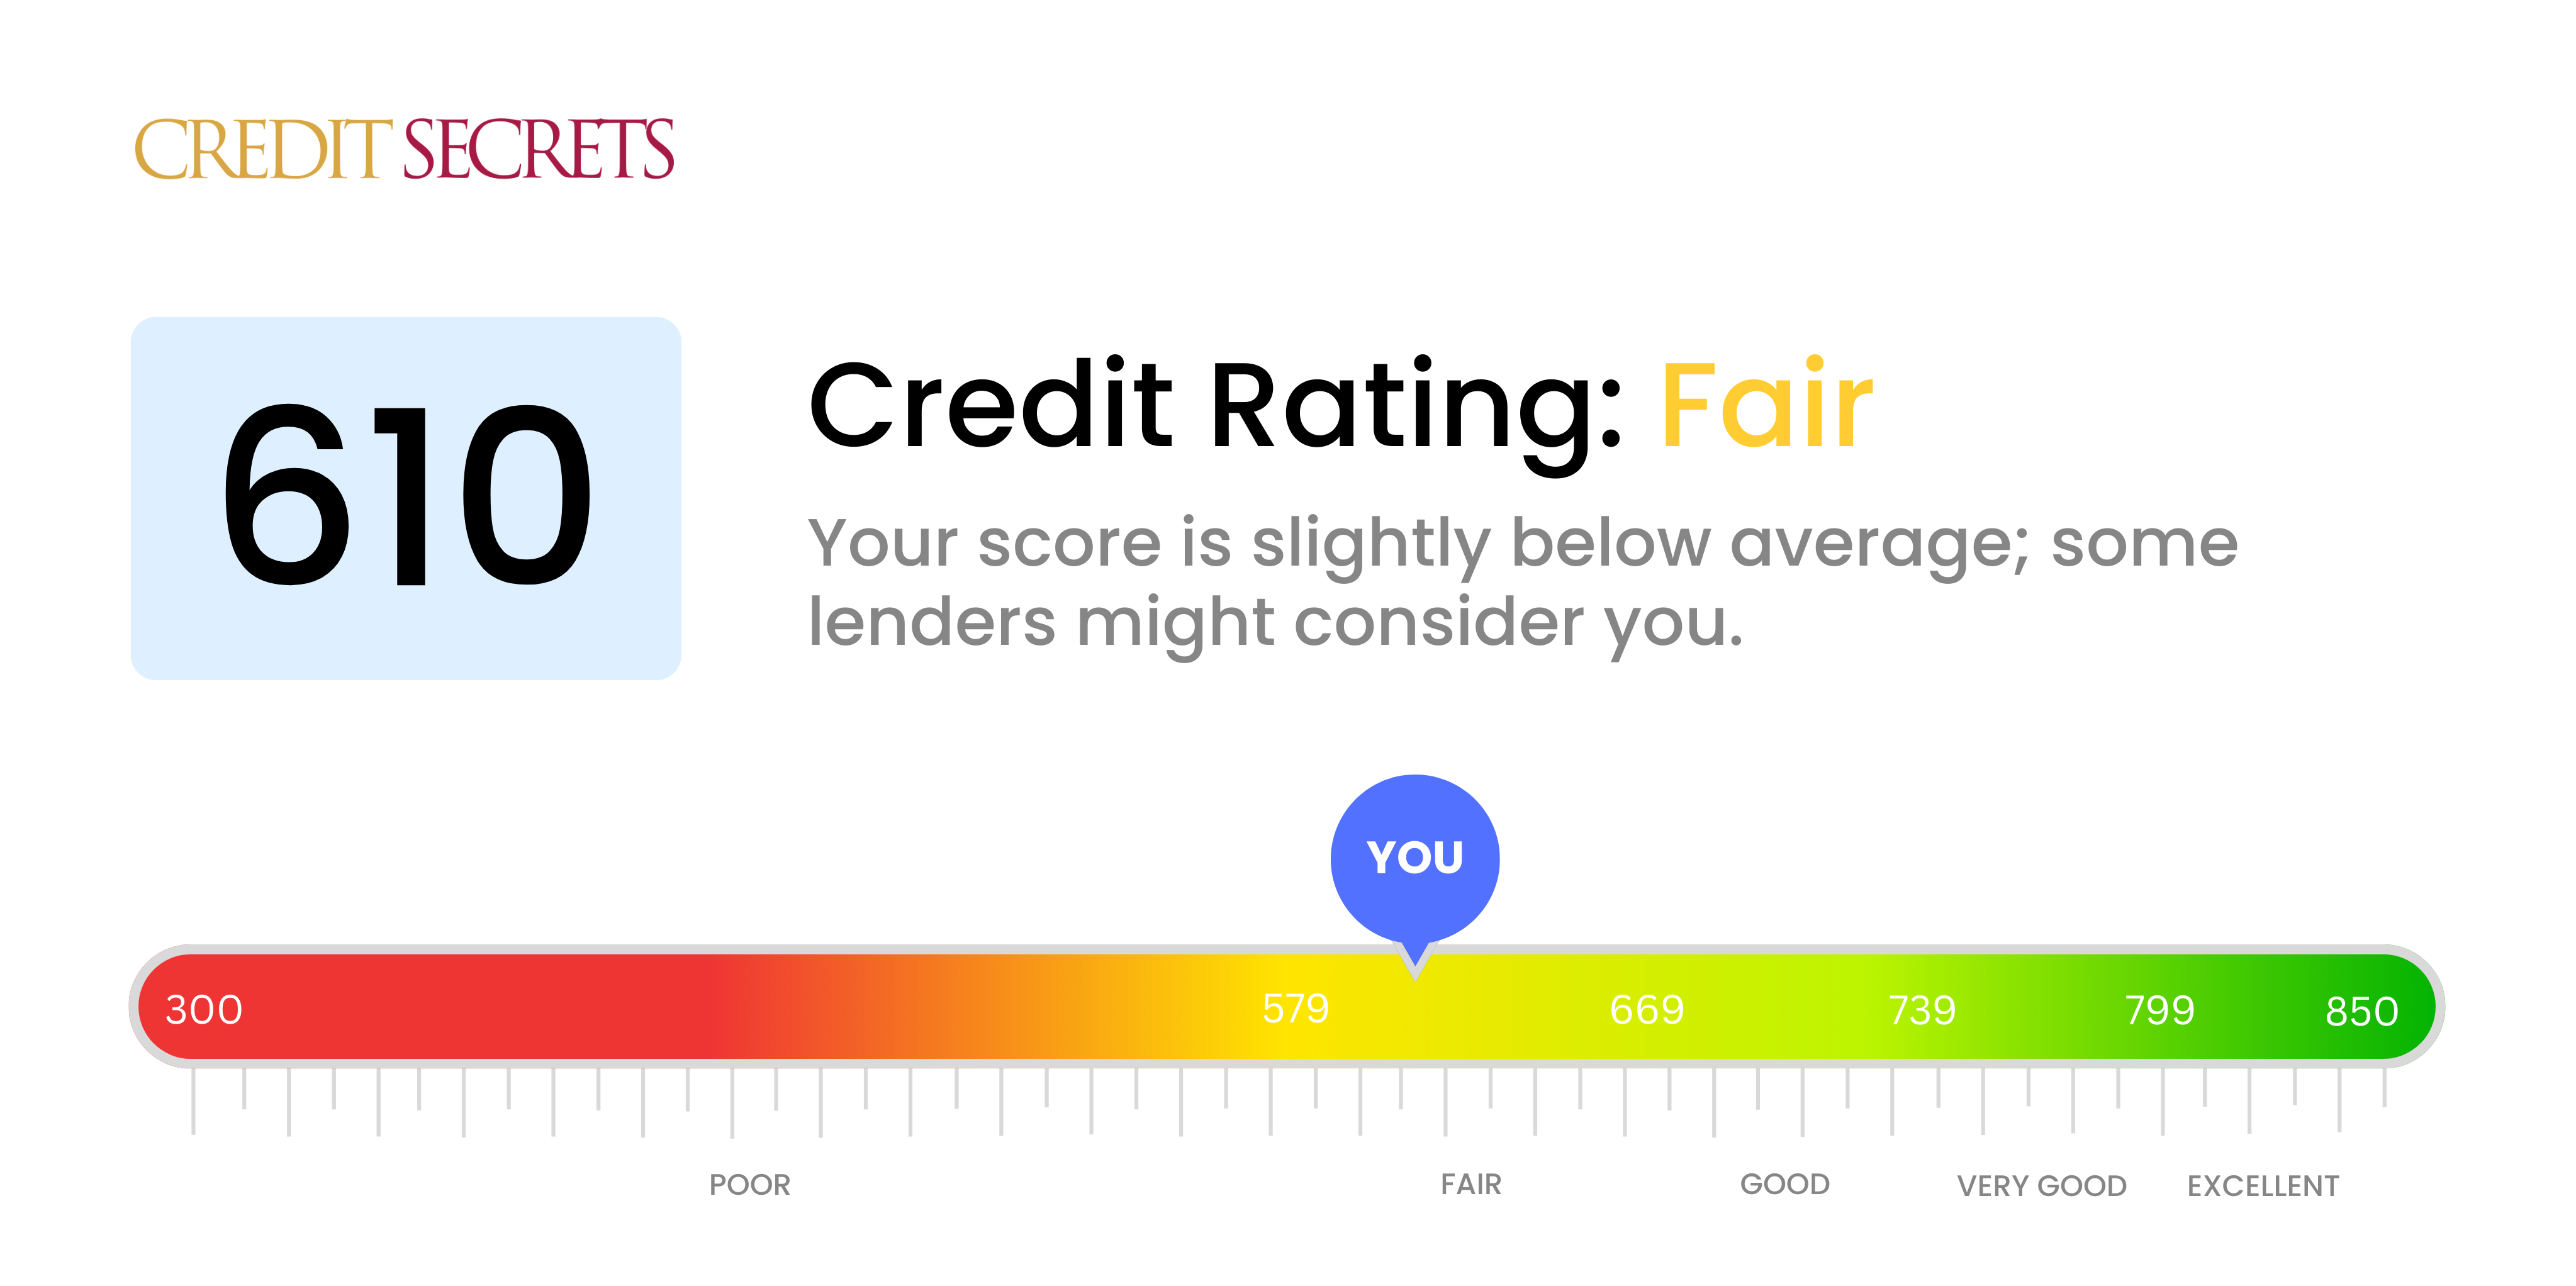 Is 610 a good credit score?